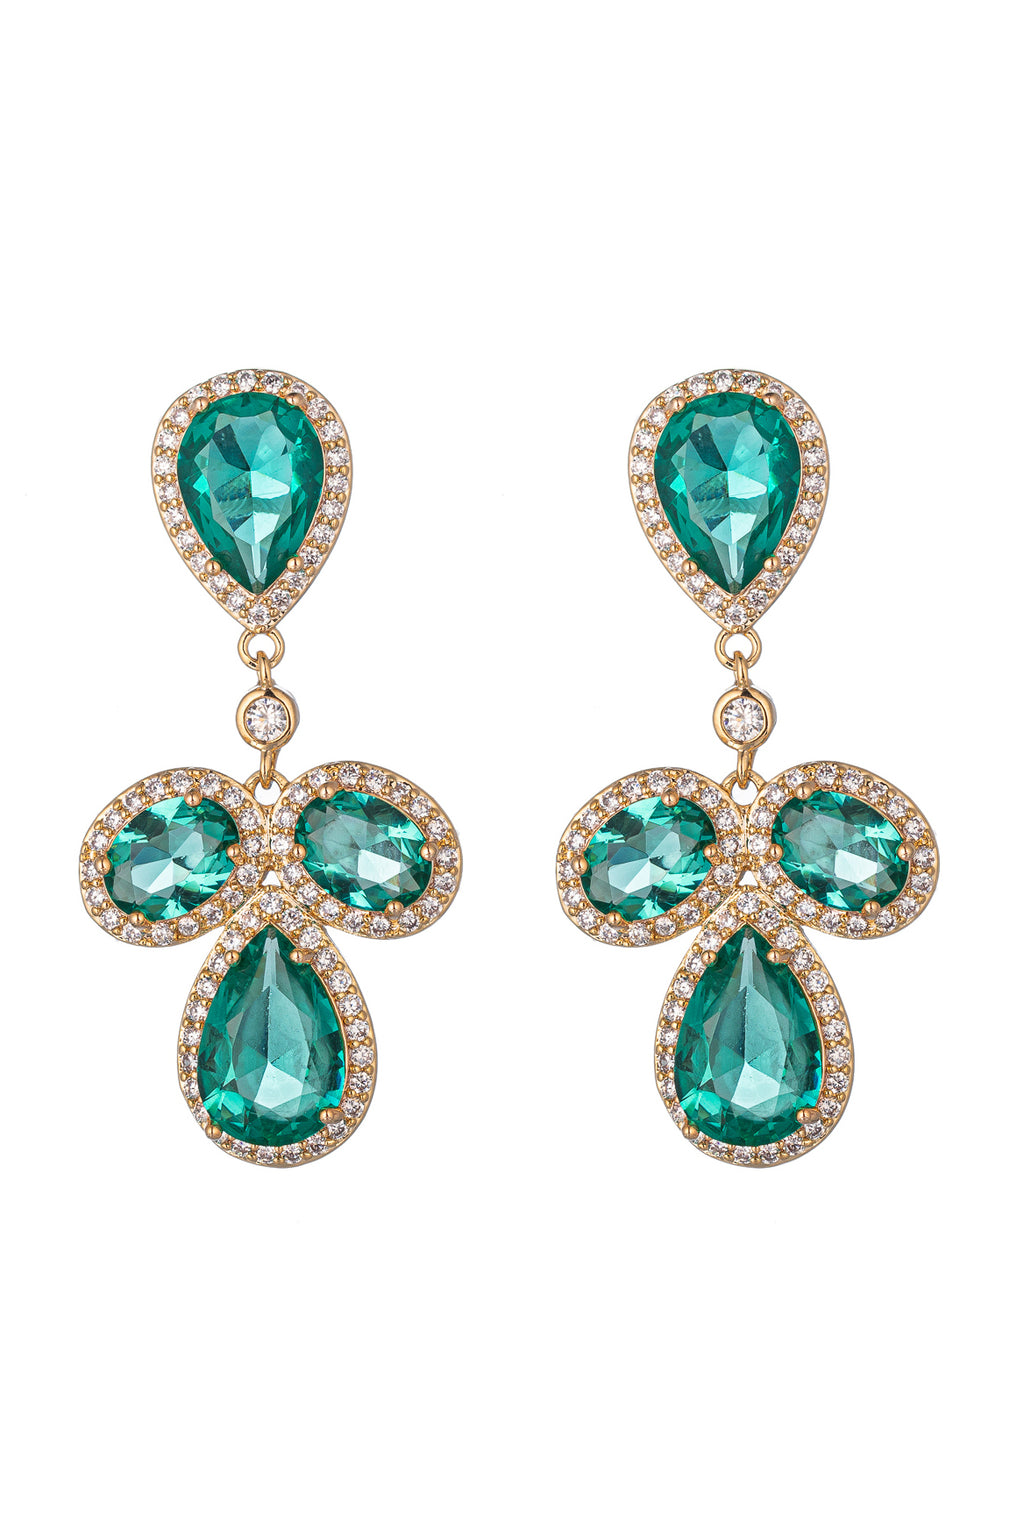 Gold tone brass statement earrings studded with green CZ crystals.